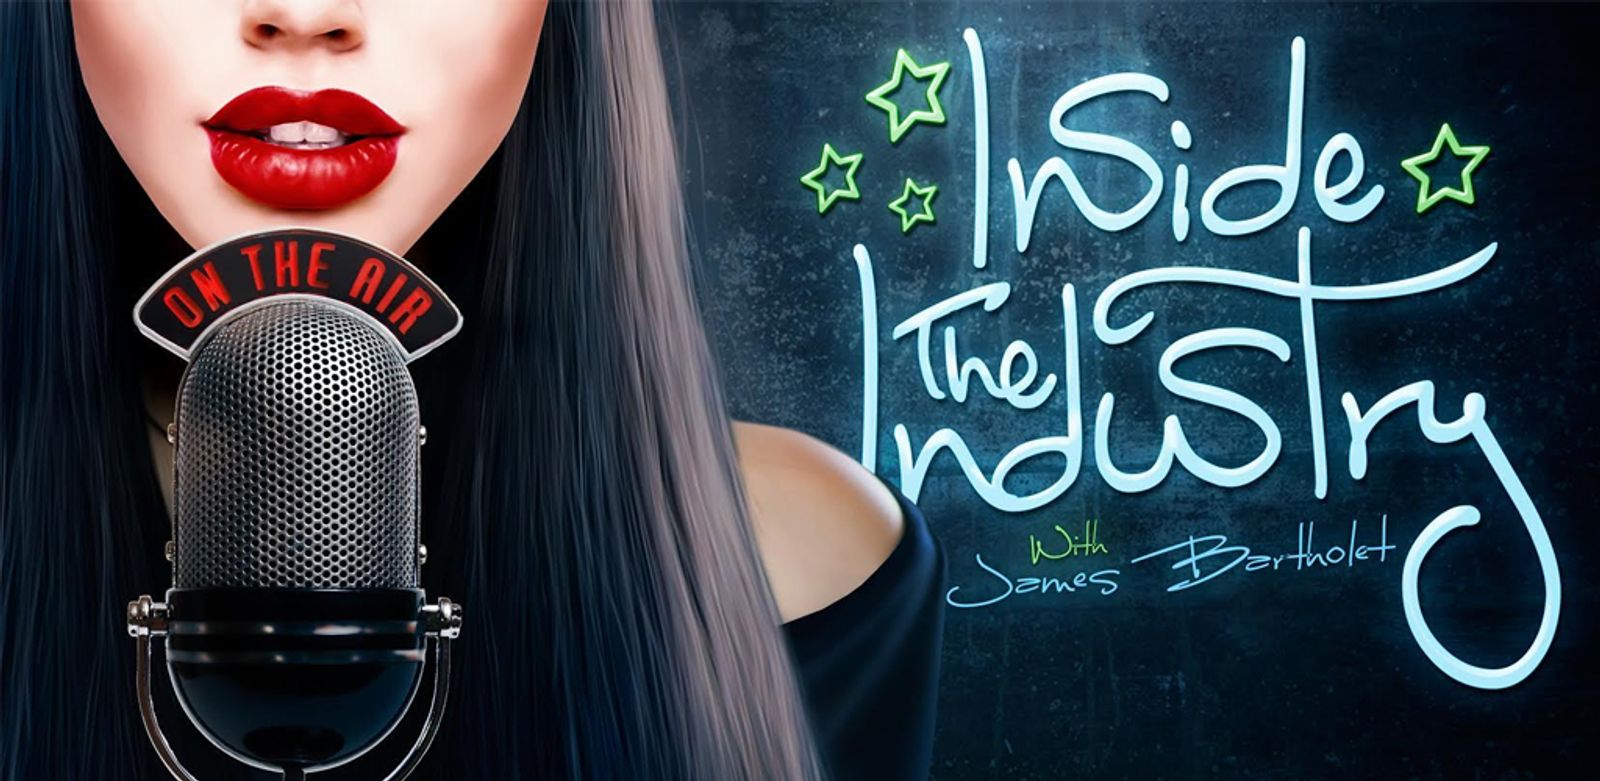 Kaylani Lei, Ryder Skye, and More on 'Inside the Industry' Wednesday